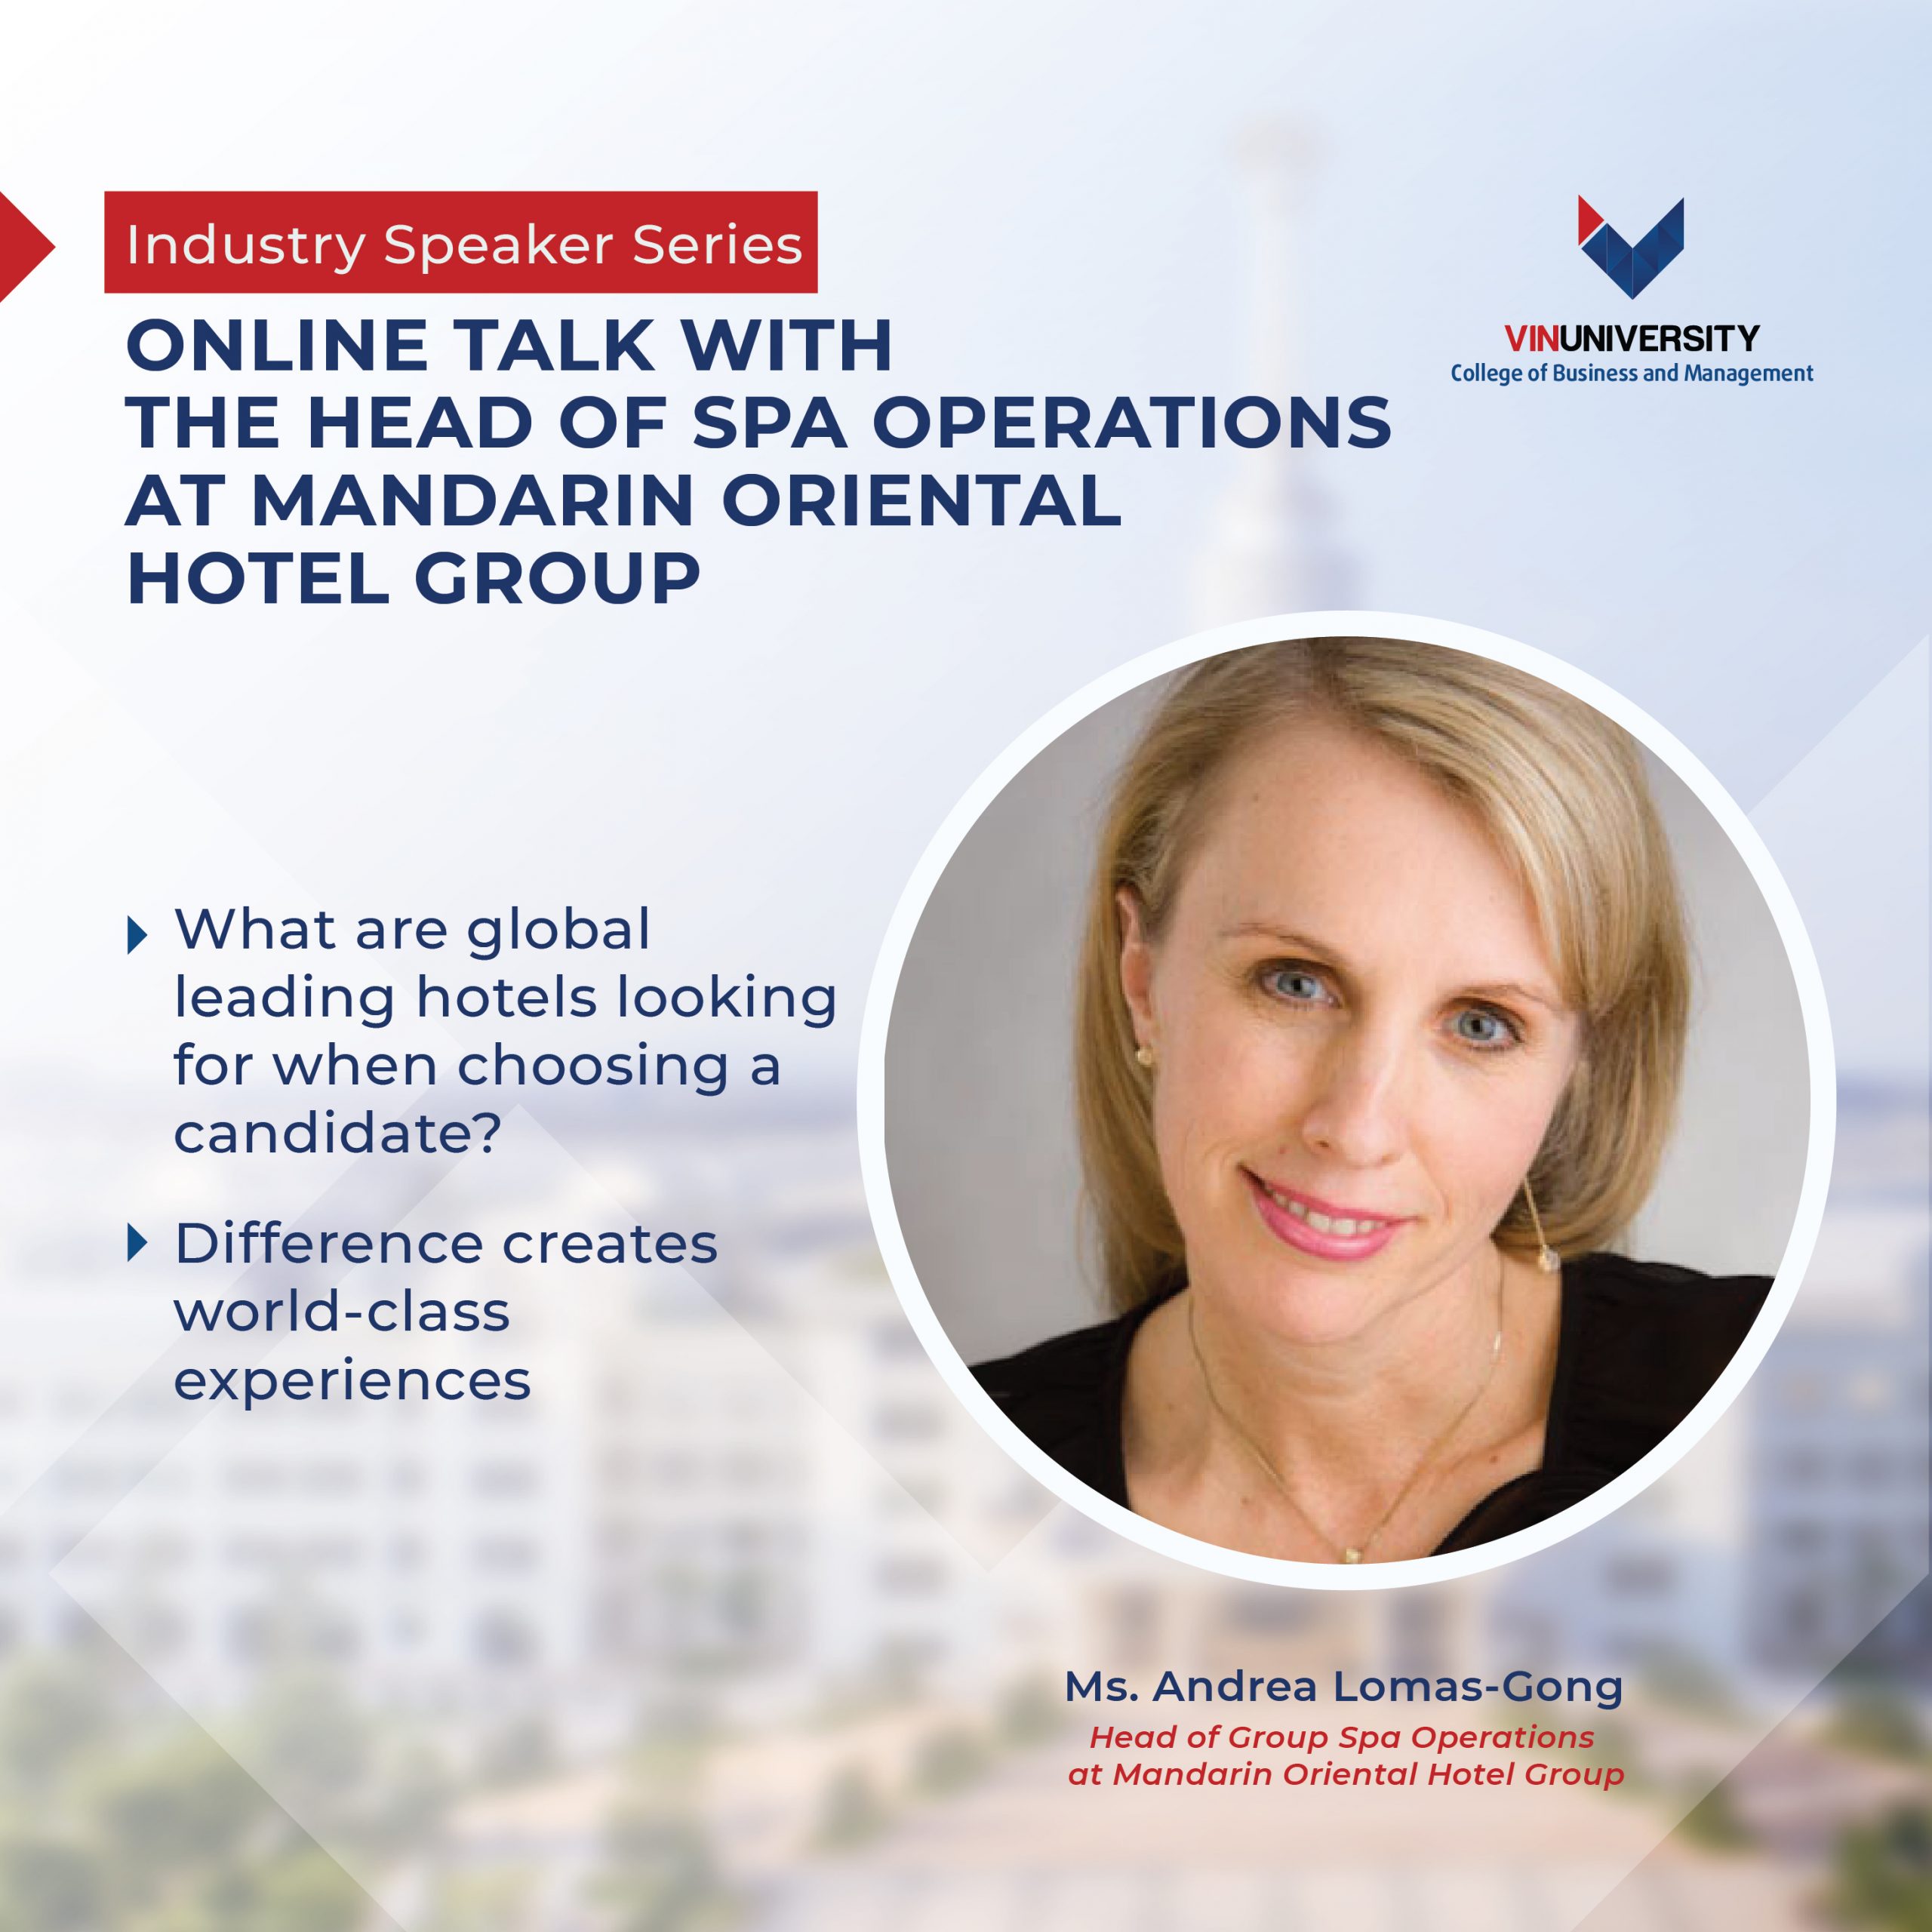 [Industry Speaker Series] Online Talk With The Head Of Group Spa Operations At Mandarin Oriental Hotel Group